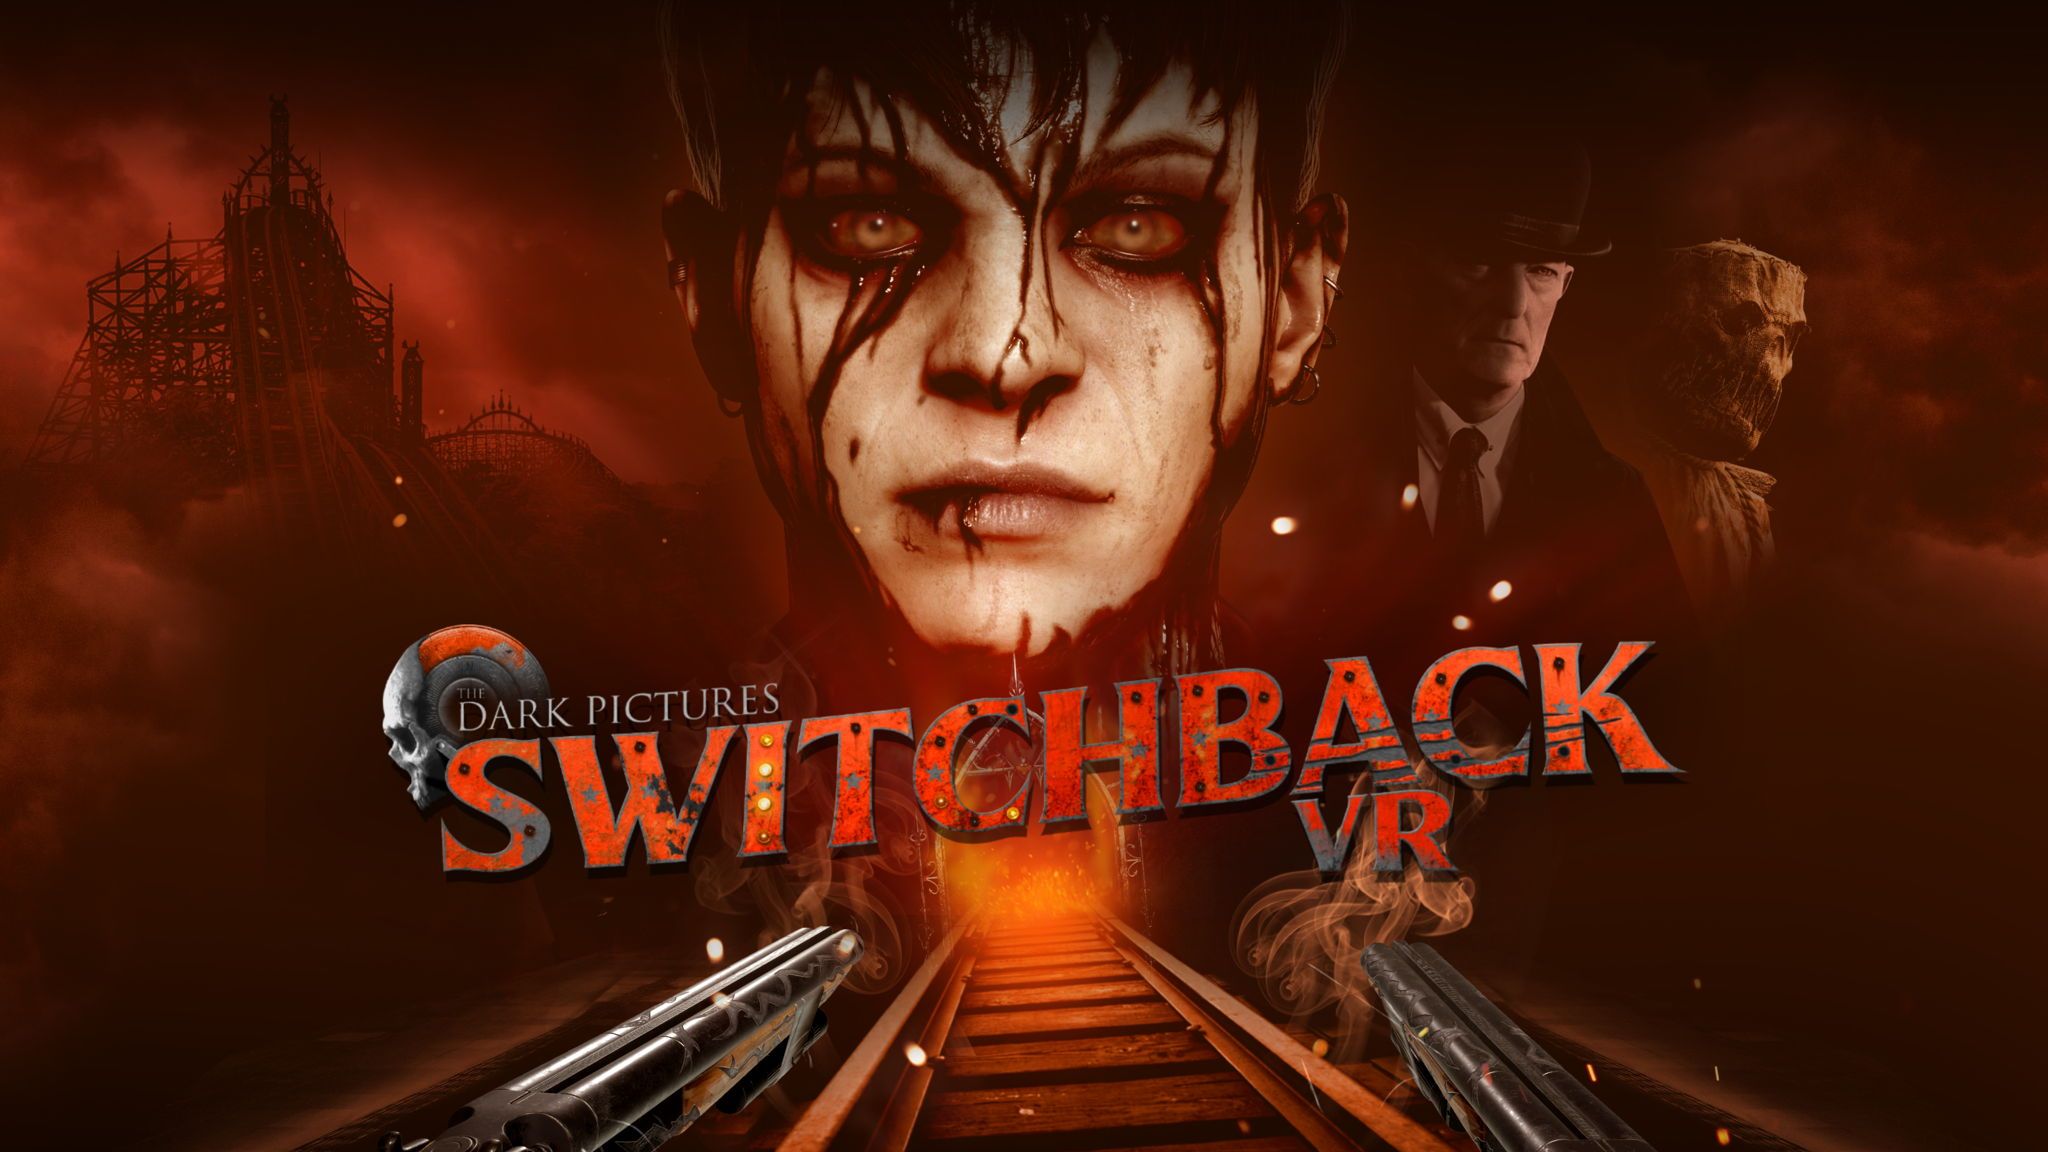 The Dark Pictures Switchback VR key artwork that shows Belial the curator and a masked person.